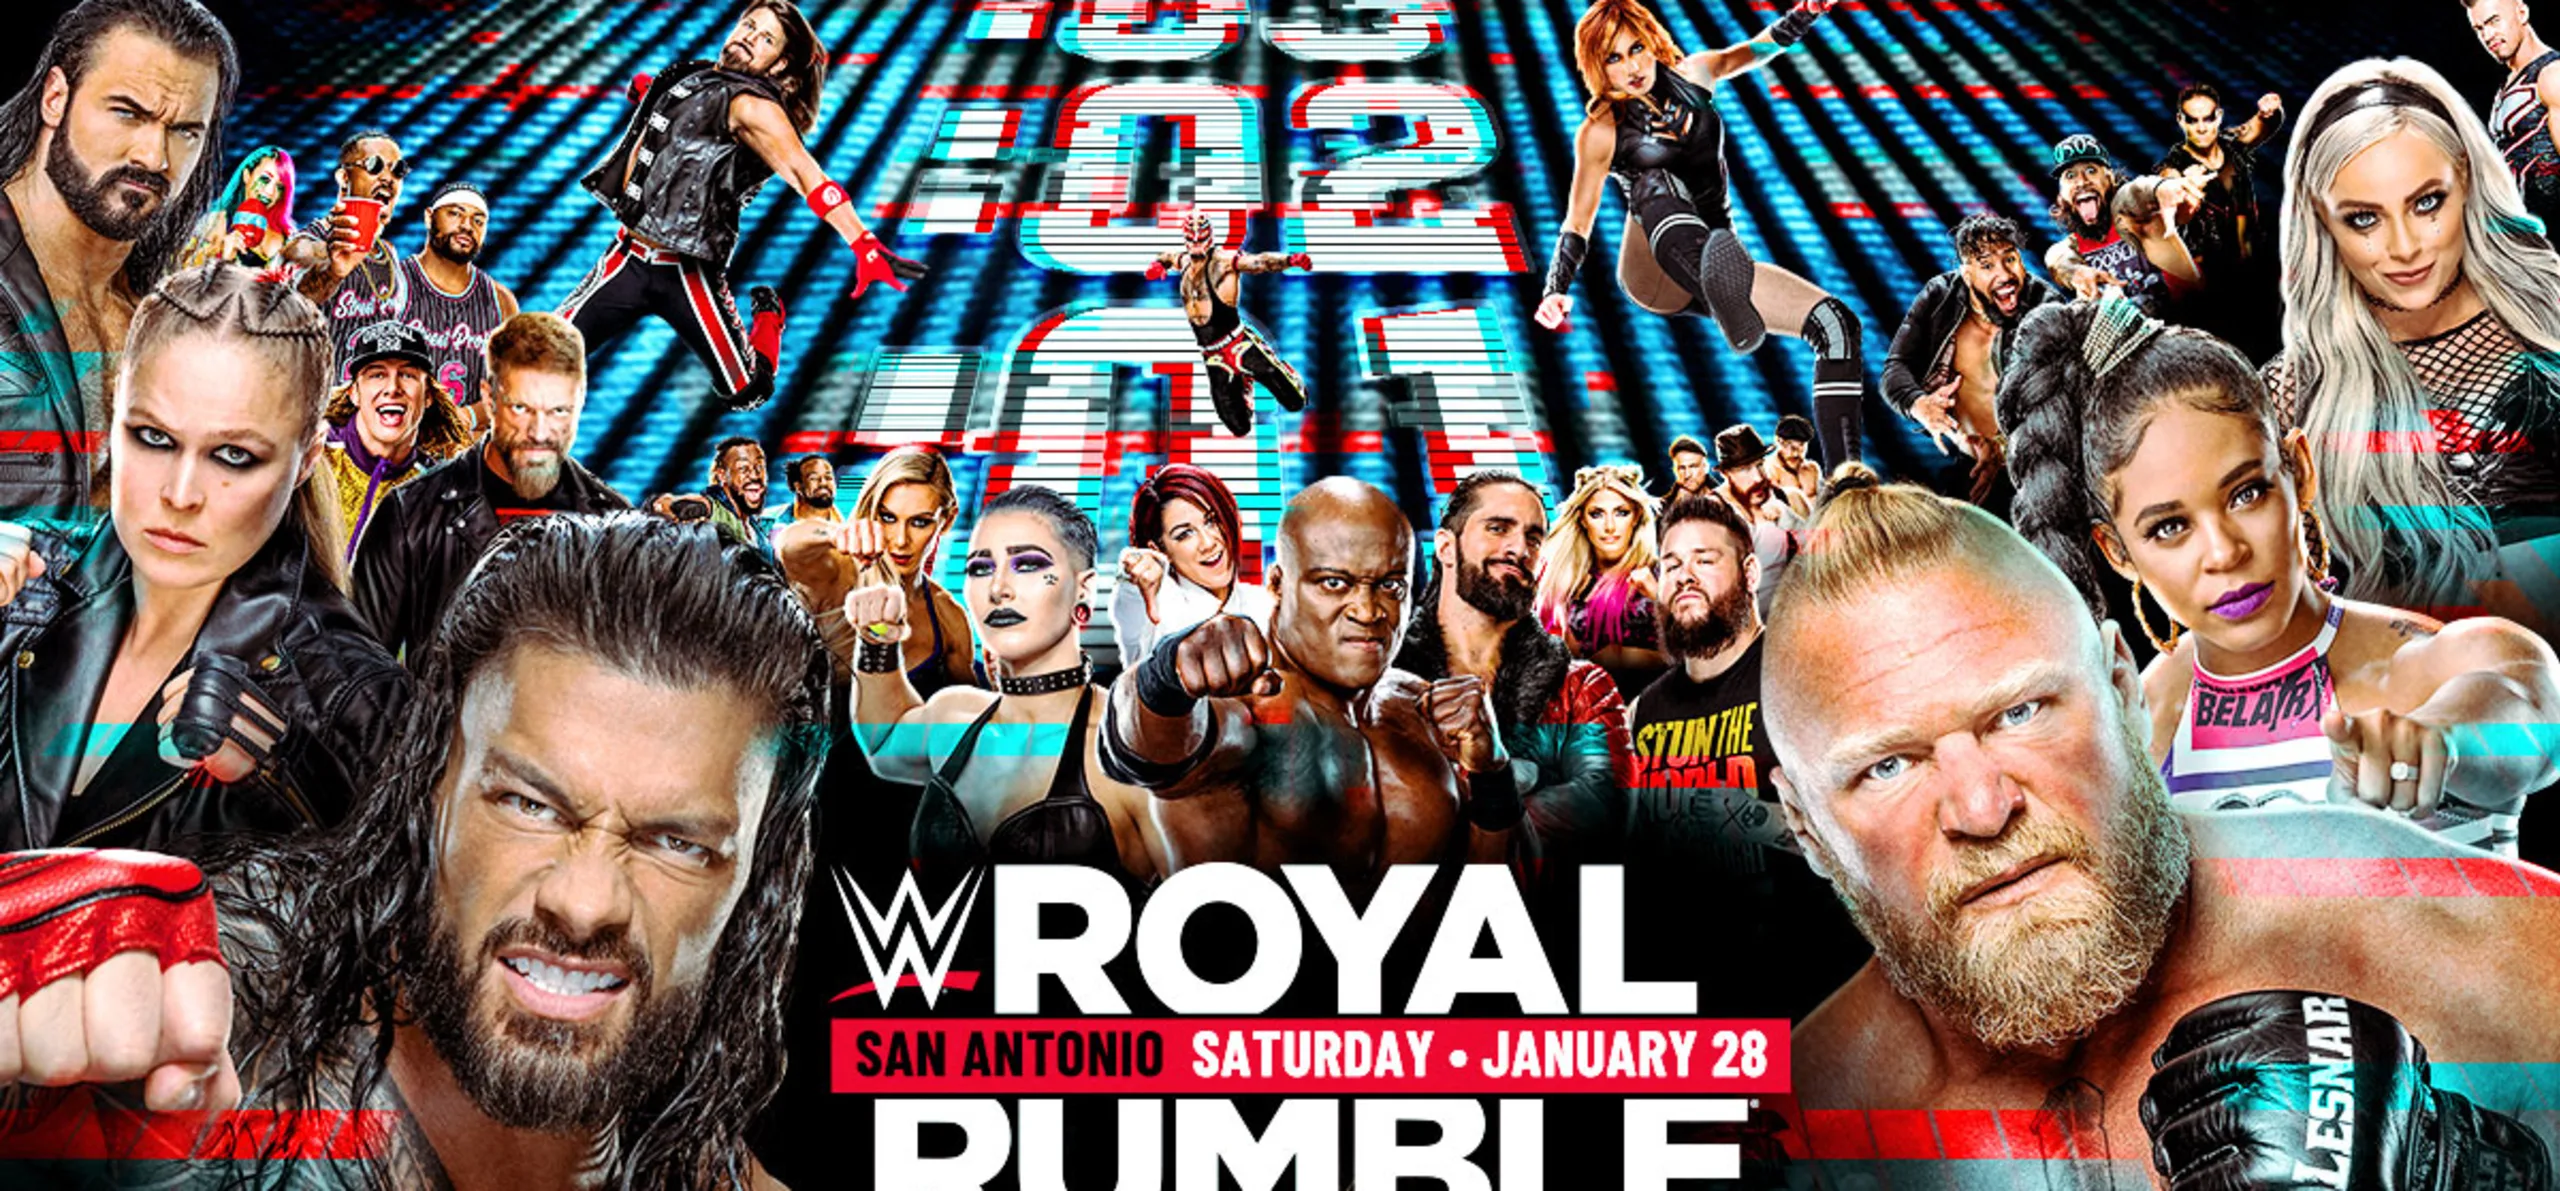 Update On Ticket Sales For The WWE's 2023 Royal Rumble Event